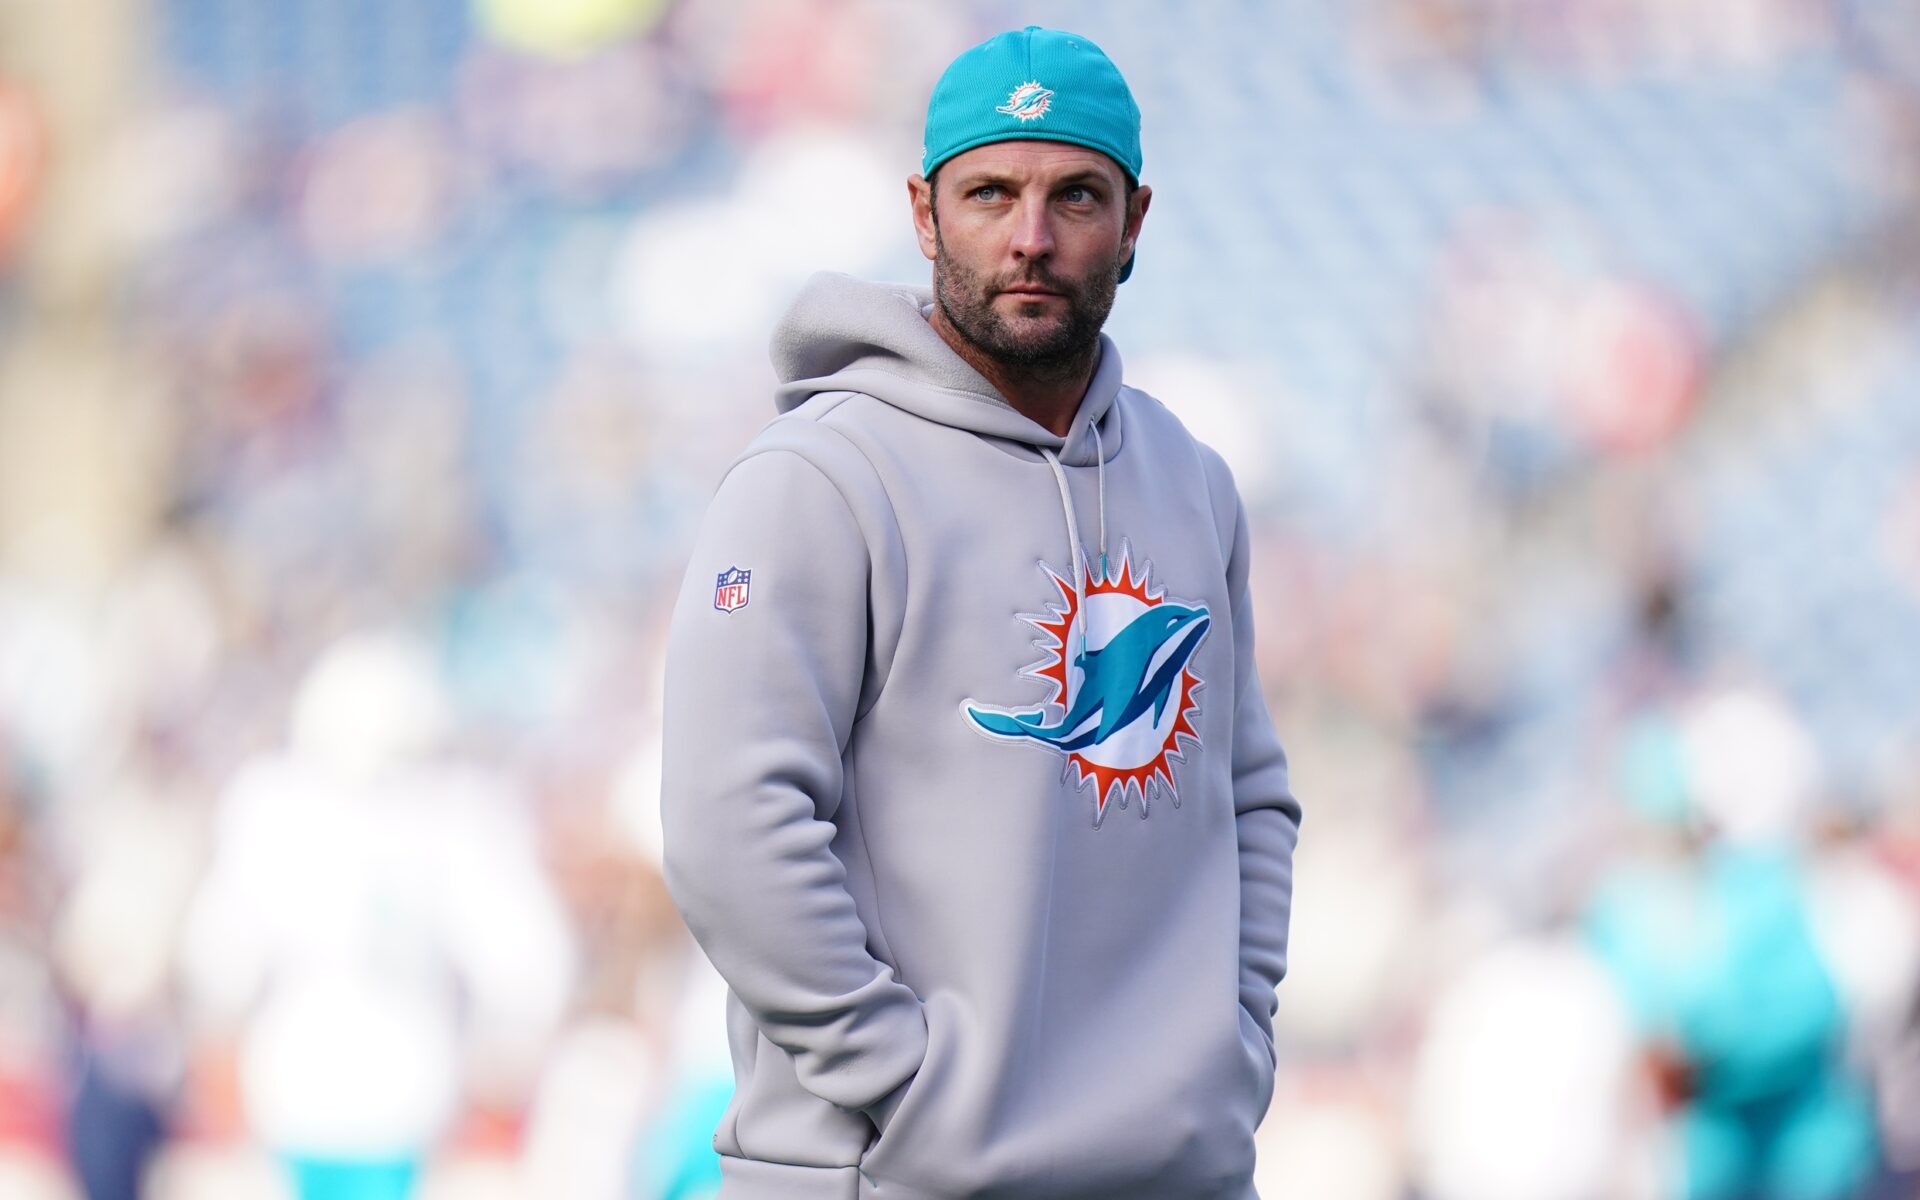 Miami Dolphins wide receivers coach and former New England Patriots player Wes Welker on the field for warm up before the start of the game against the New England Patriots at Gillette Stadium.